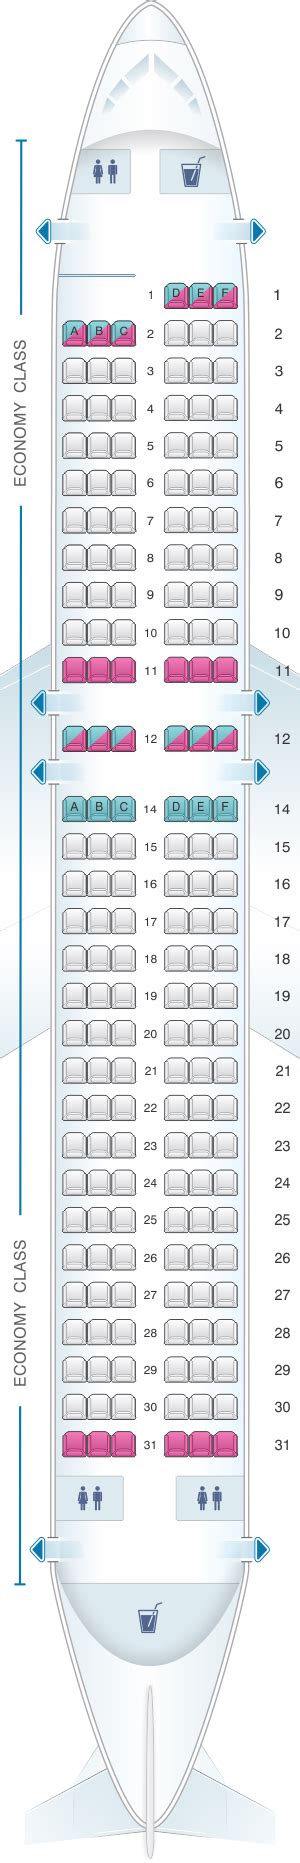 Allegiant Air Airbus A320 Seat Map; Seat 23d; Allegiant Air Reviews. Seating Charts · Airbus A319 Airbus A320 · Boeing 757-200 · McDonnell Douglas MD-80 . Allegiant Air Airbus A320 Seat Reviews Show seat chart [1] Pro tips: this seat has extra legroom : no under-seat stowage during takeoff and landing :